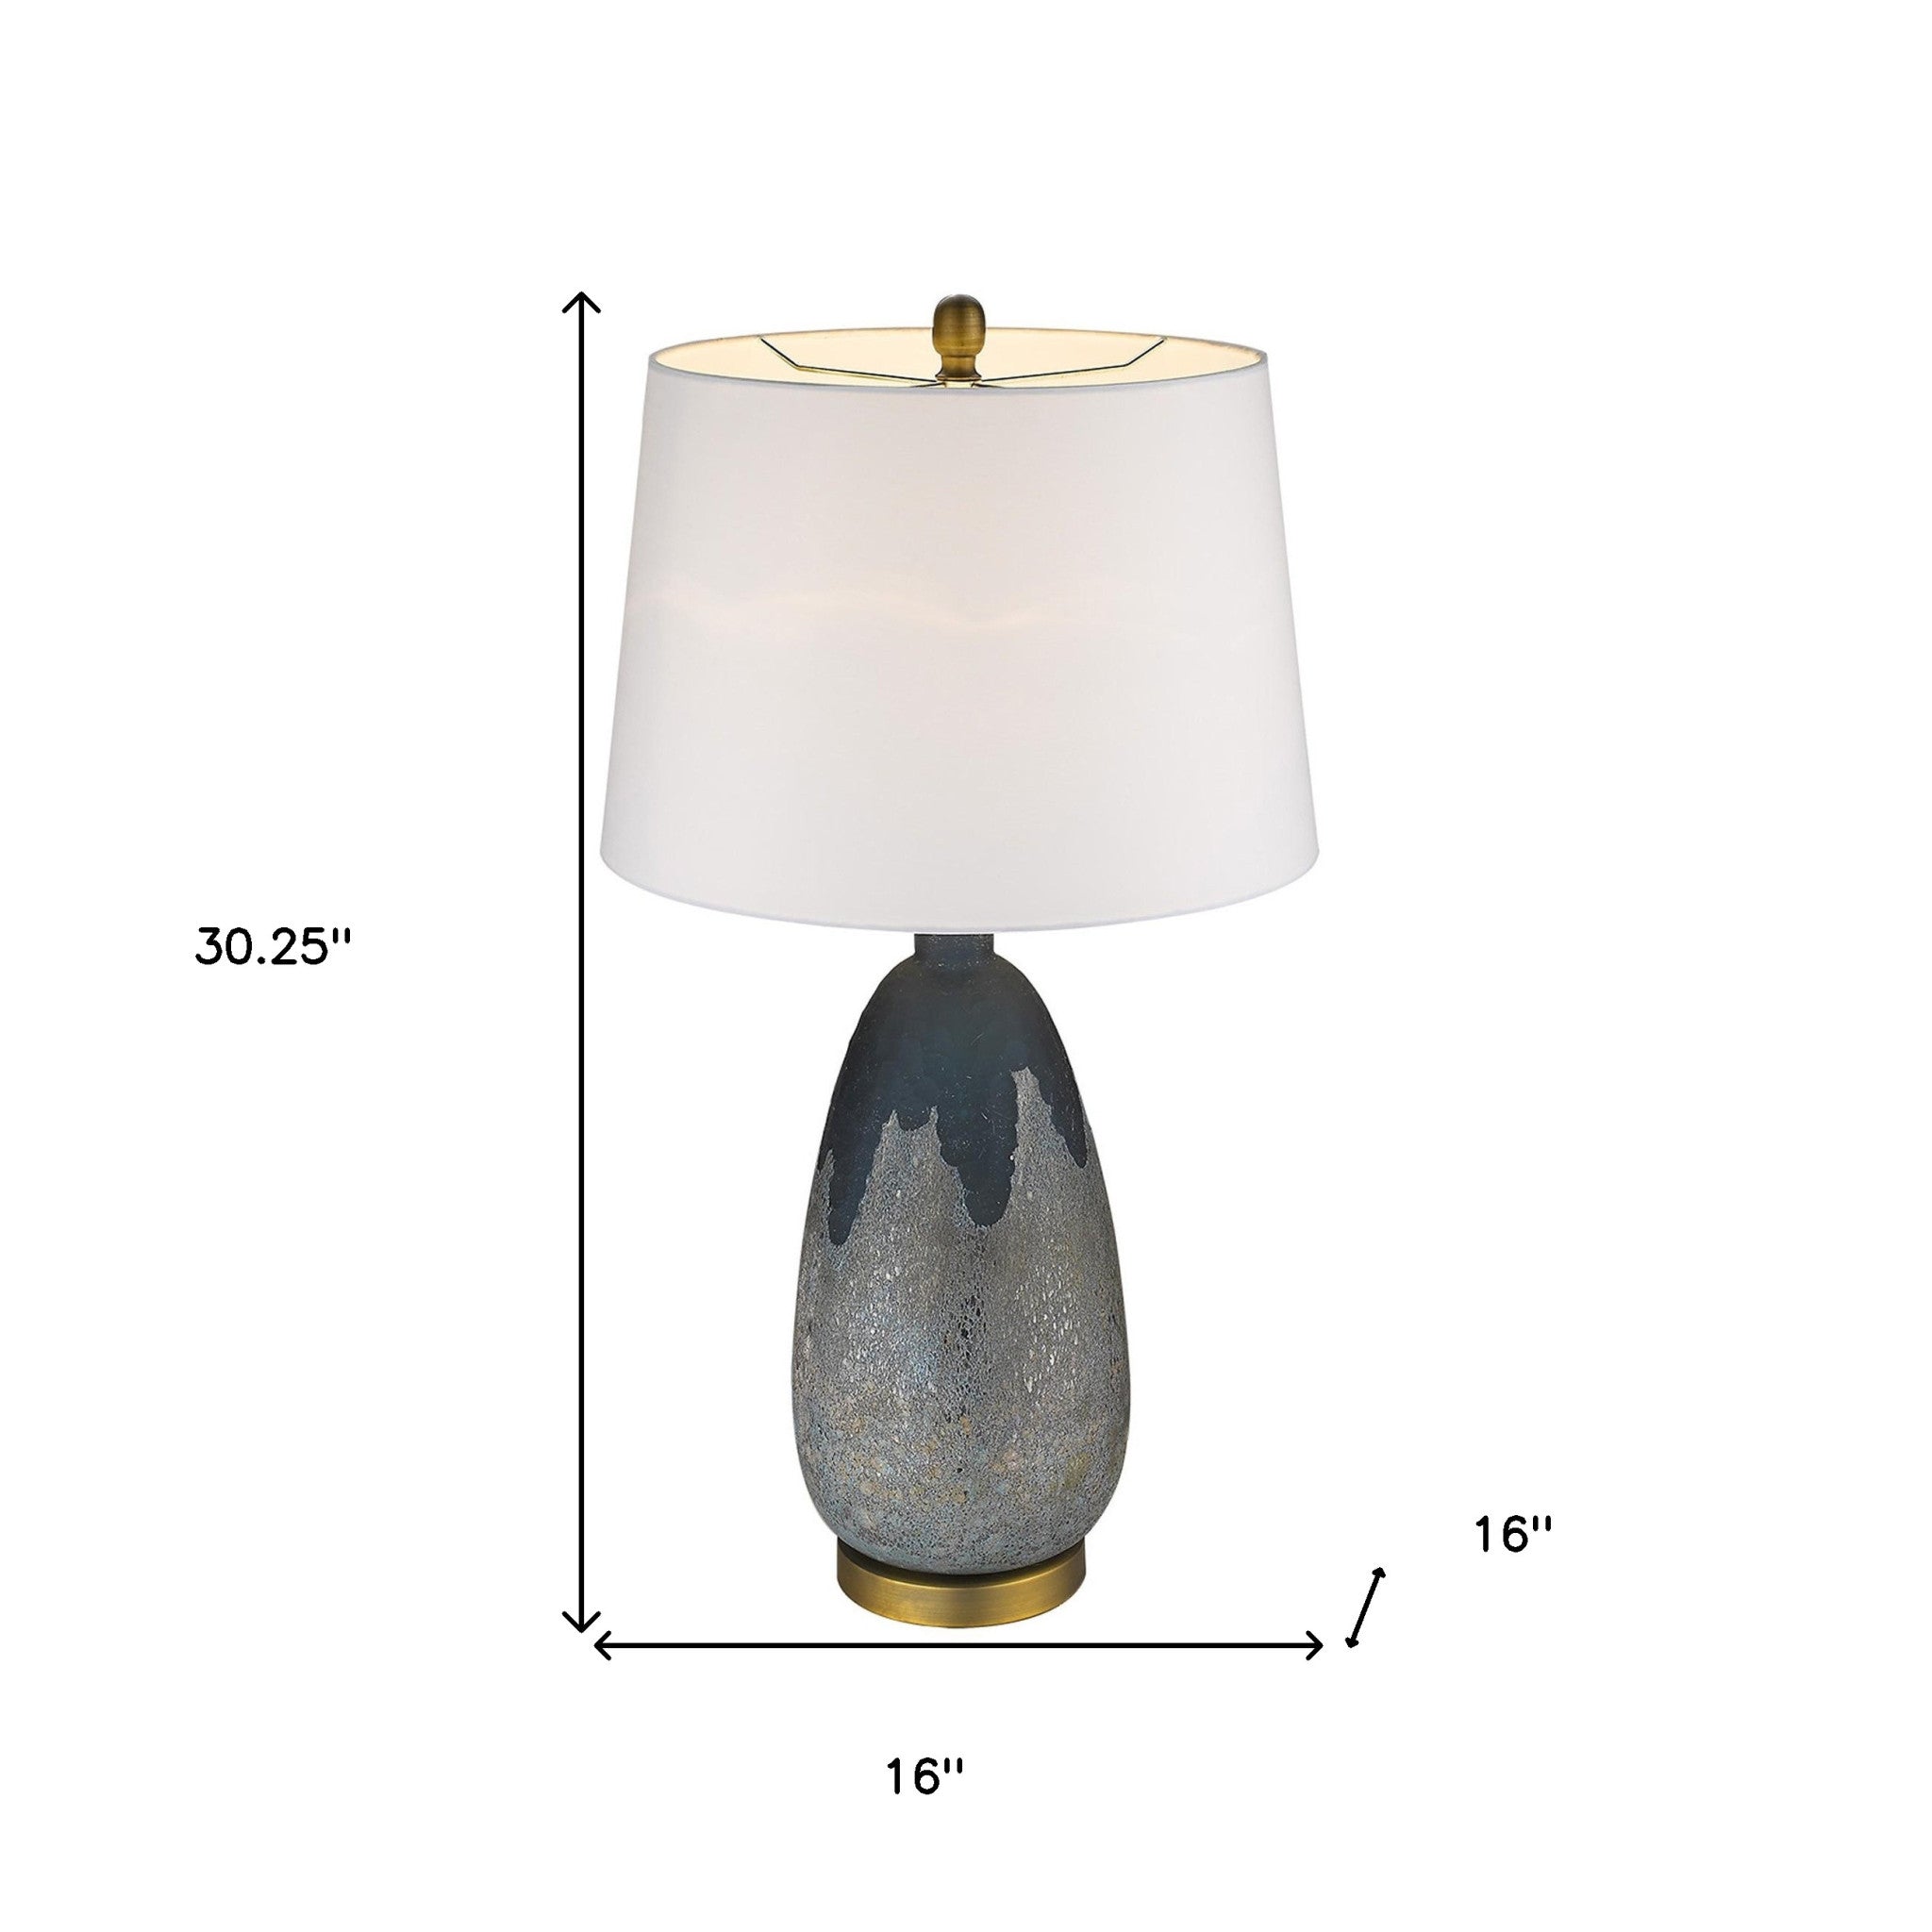 30" Brass Metal Table Lamp With White Empire Shade